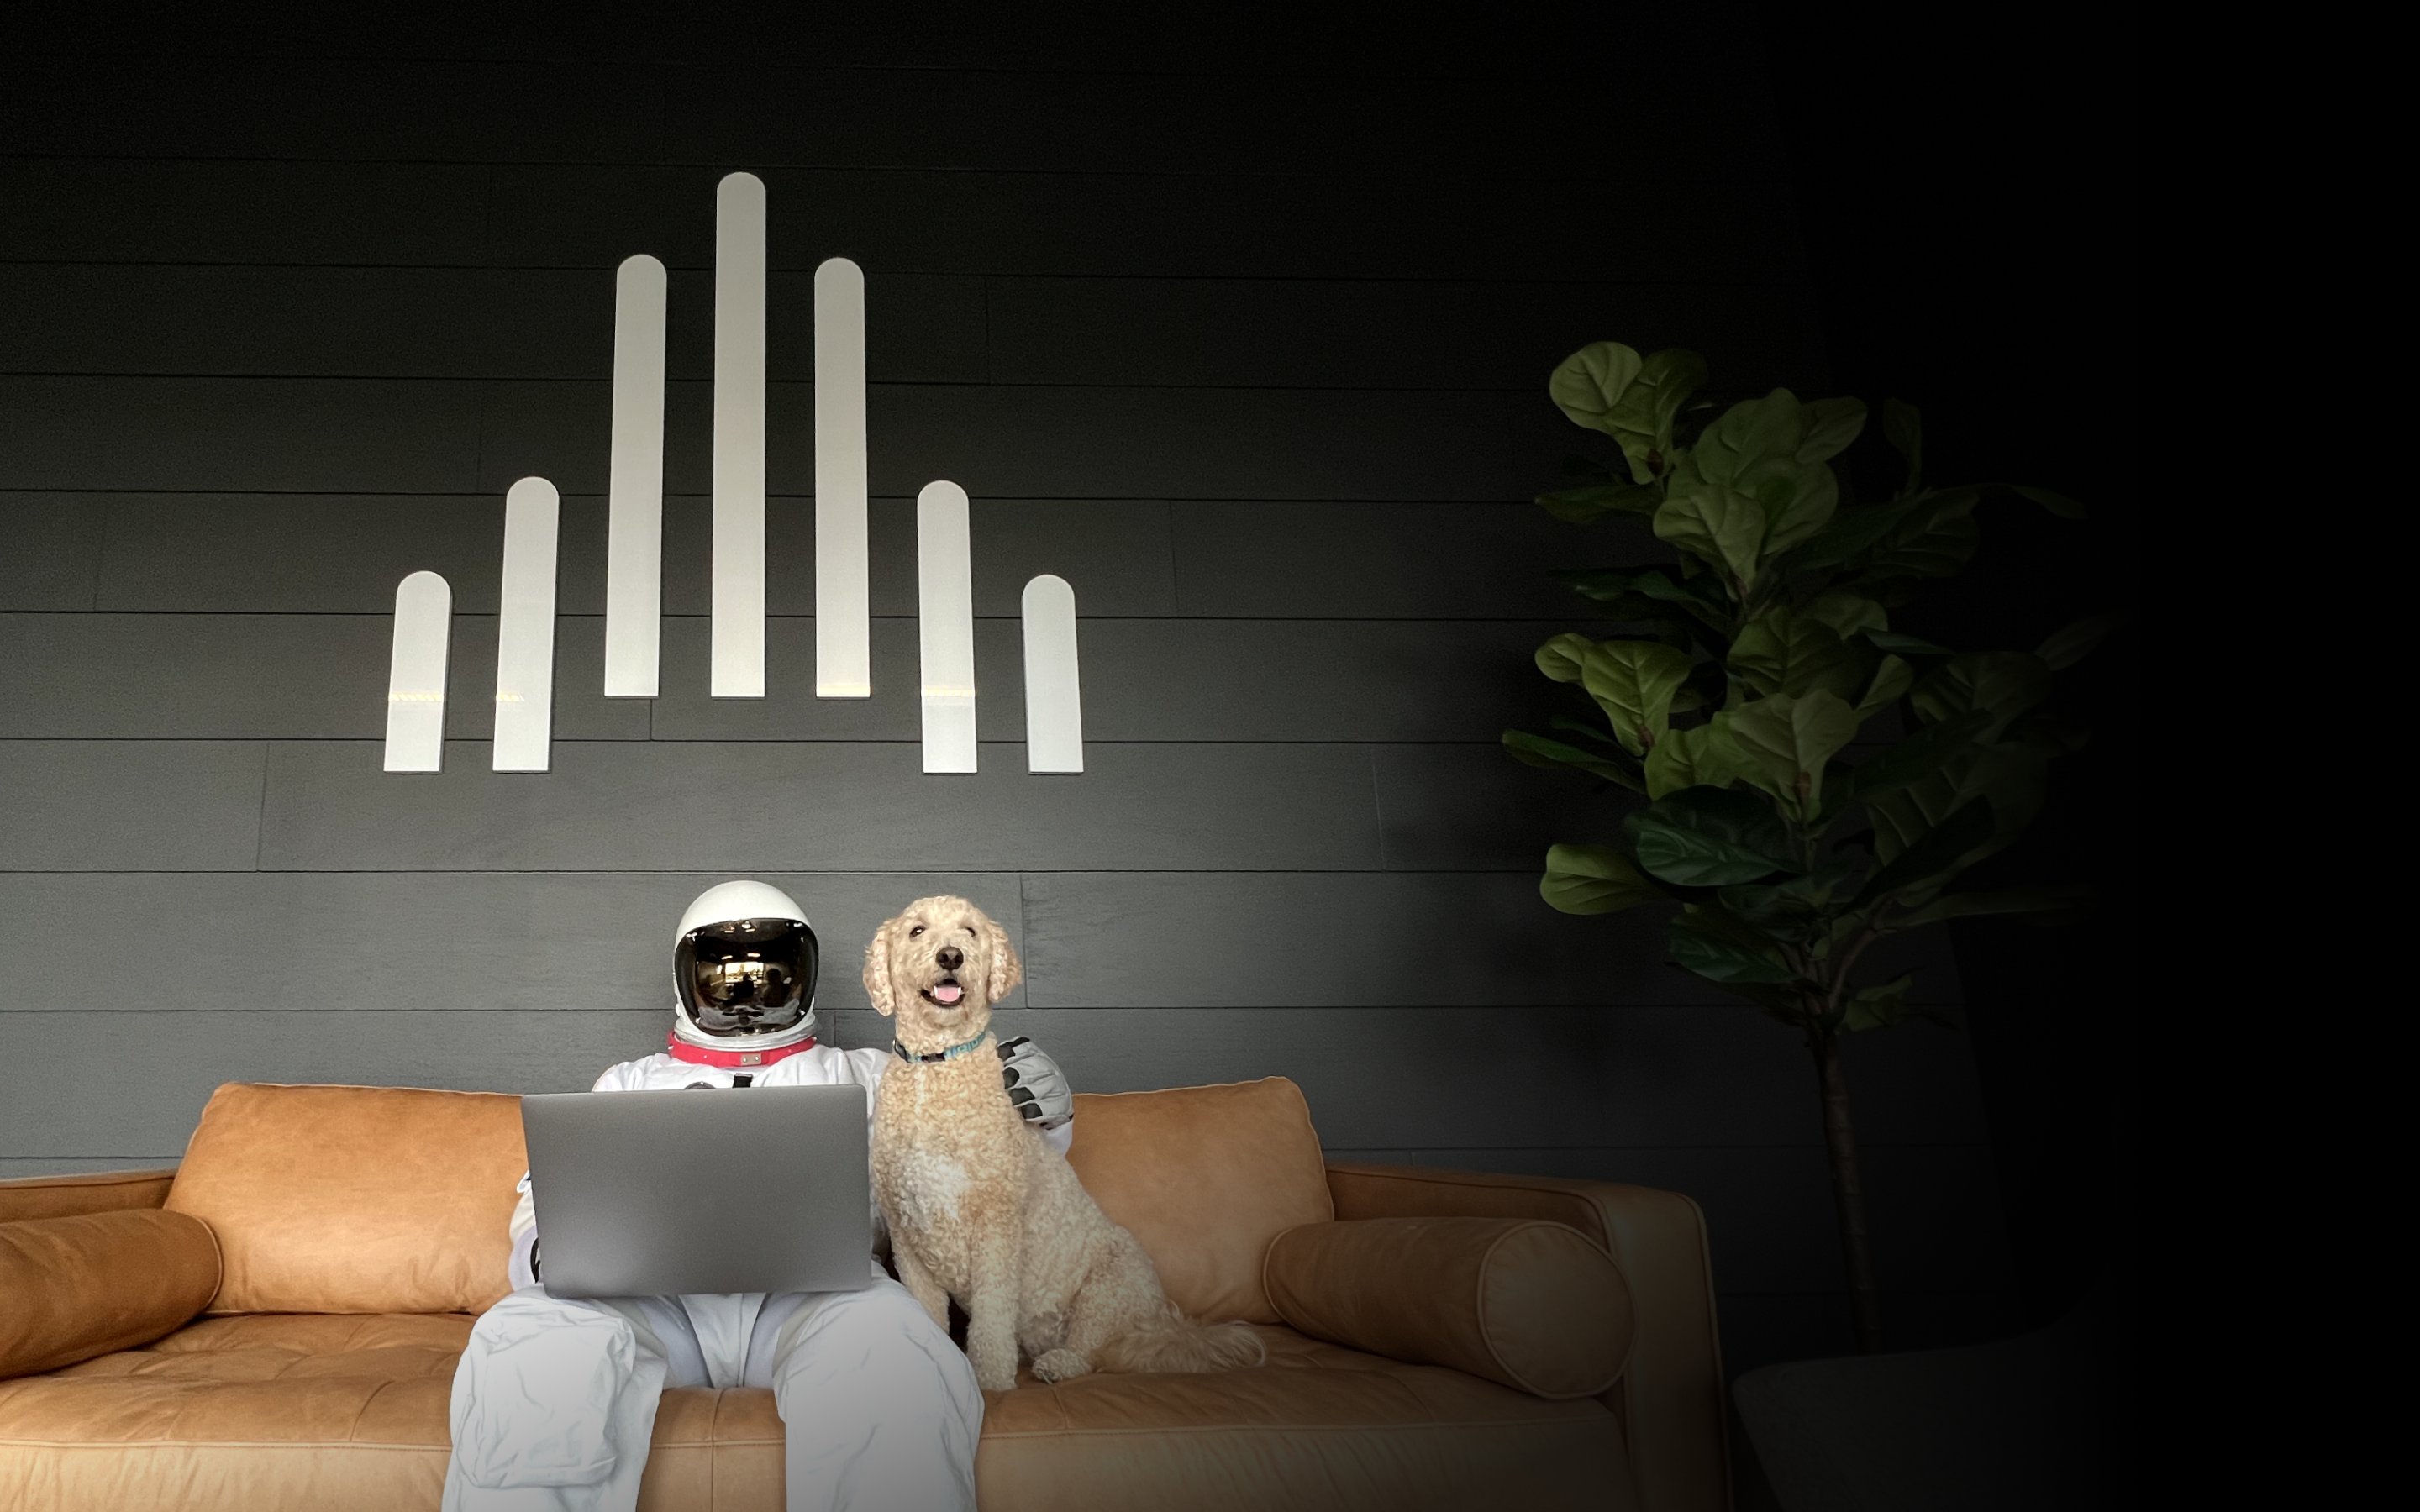 An astronaut with a laptop, sitting on a couch with a large dog.